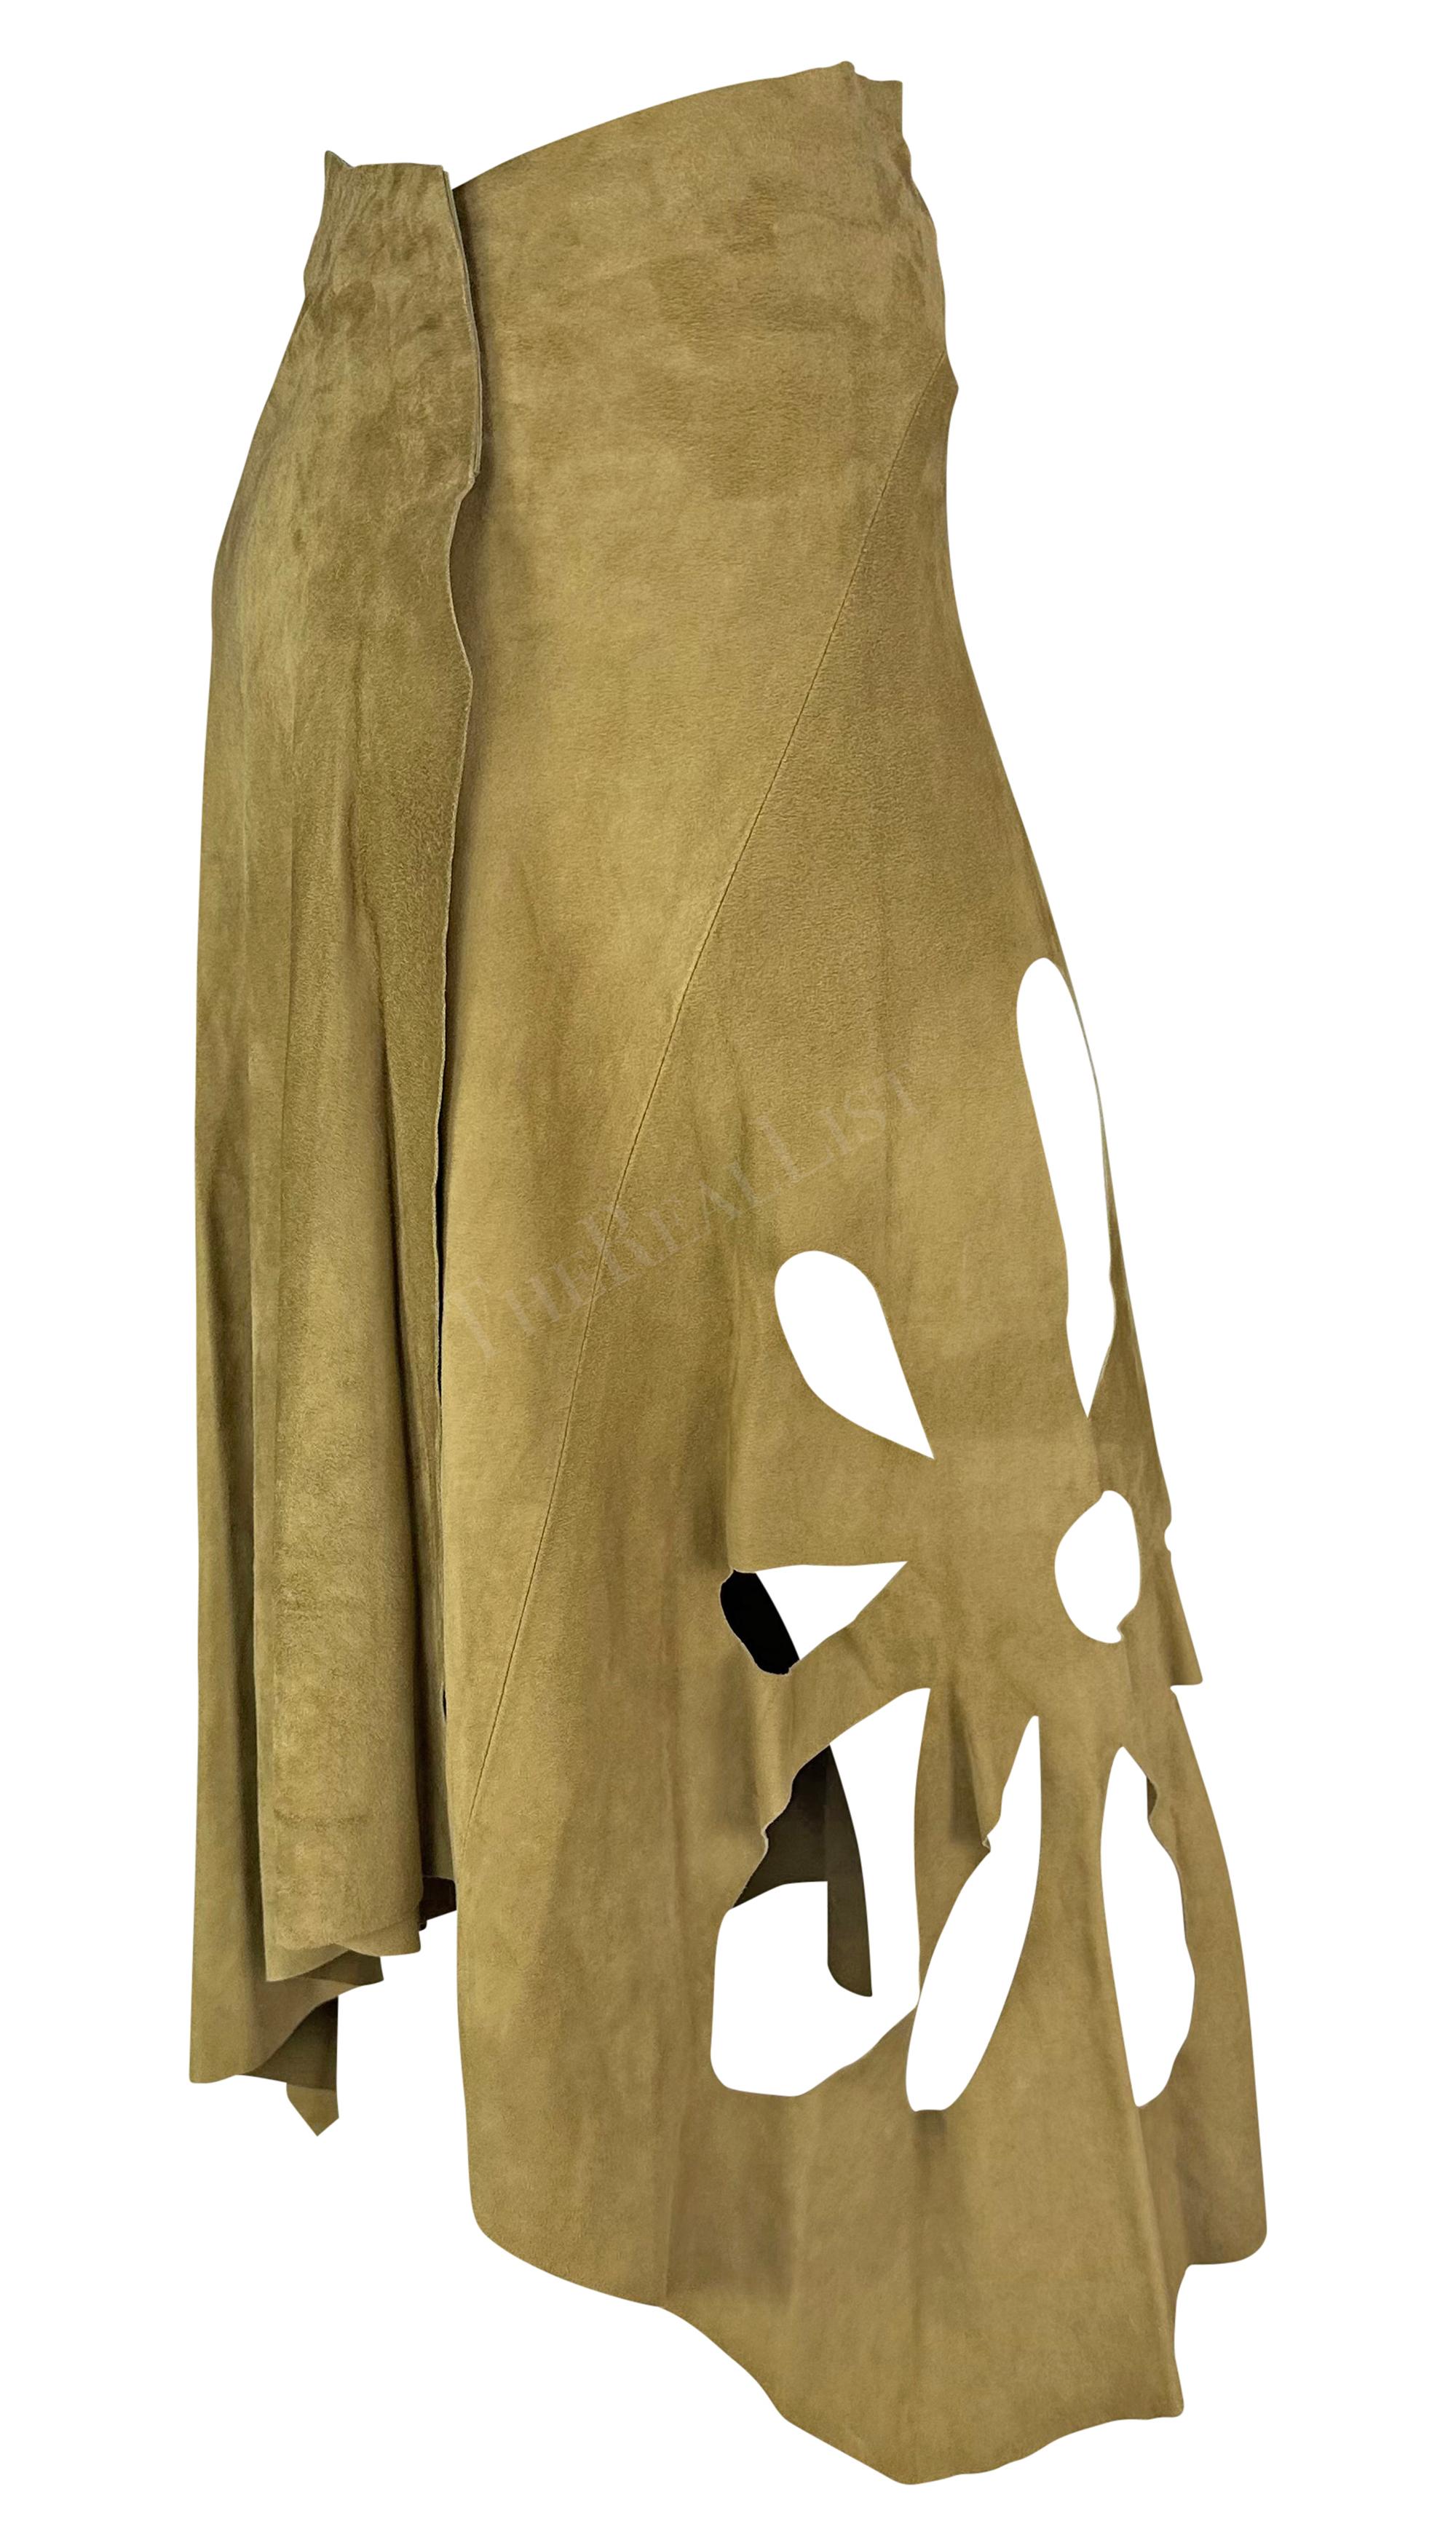 Women's S/S 2002 Gucci by Tom Ford Tan Suede Floral Cutout Flare Wrap Skirt For Sale